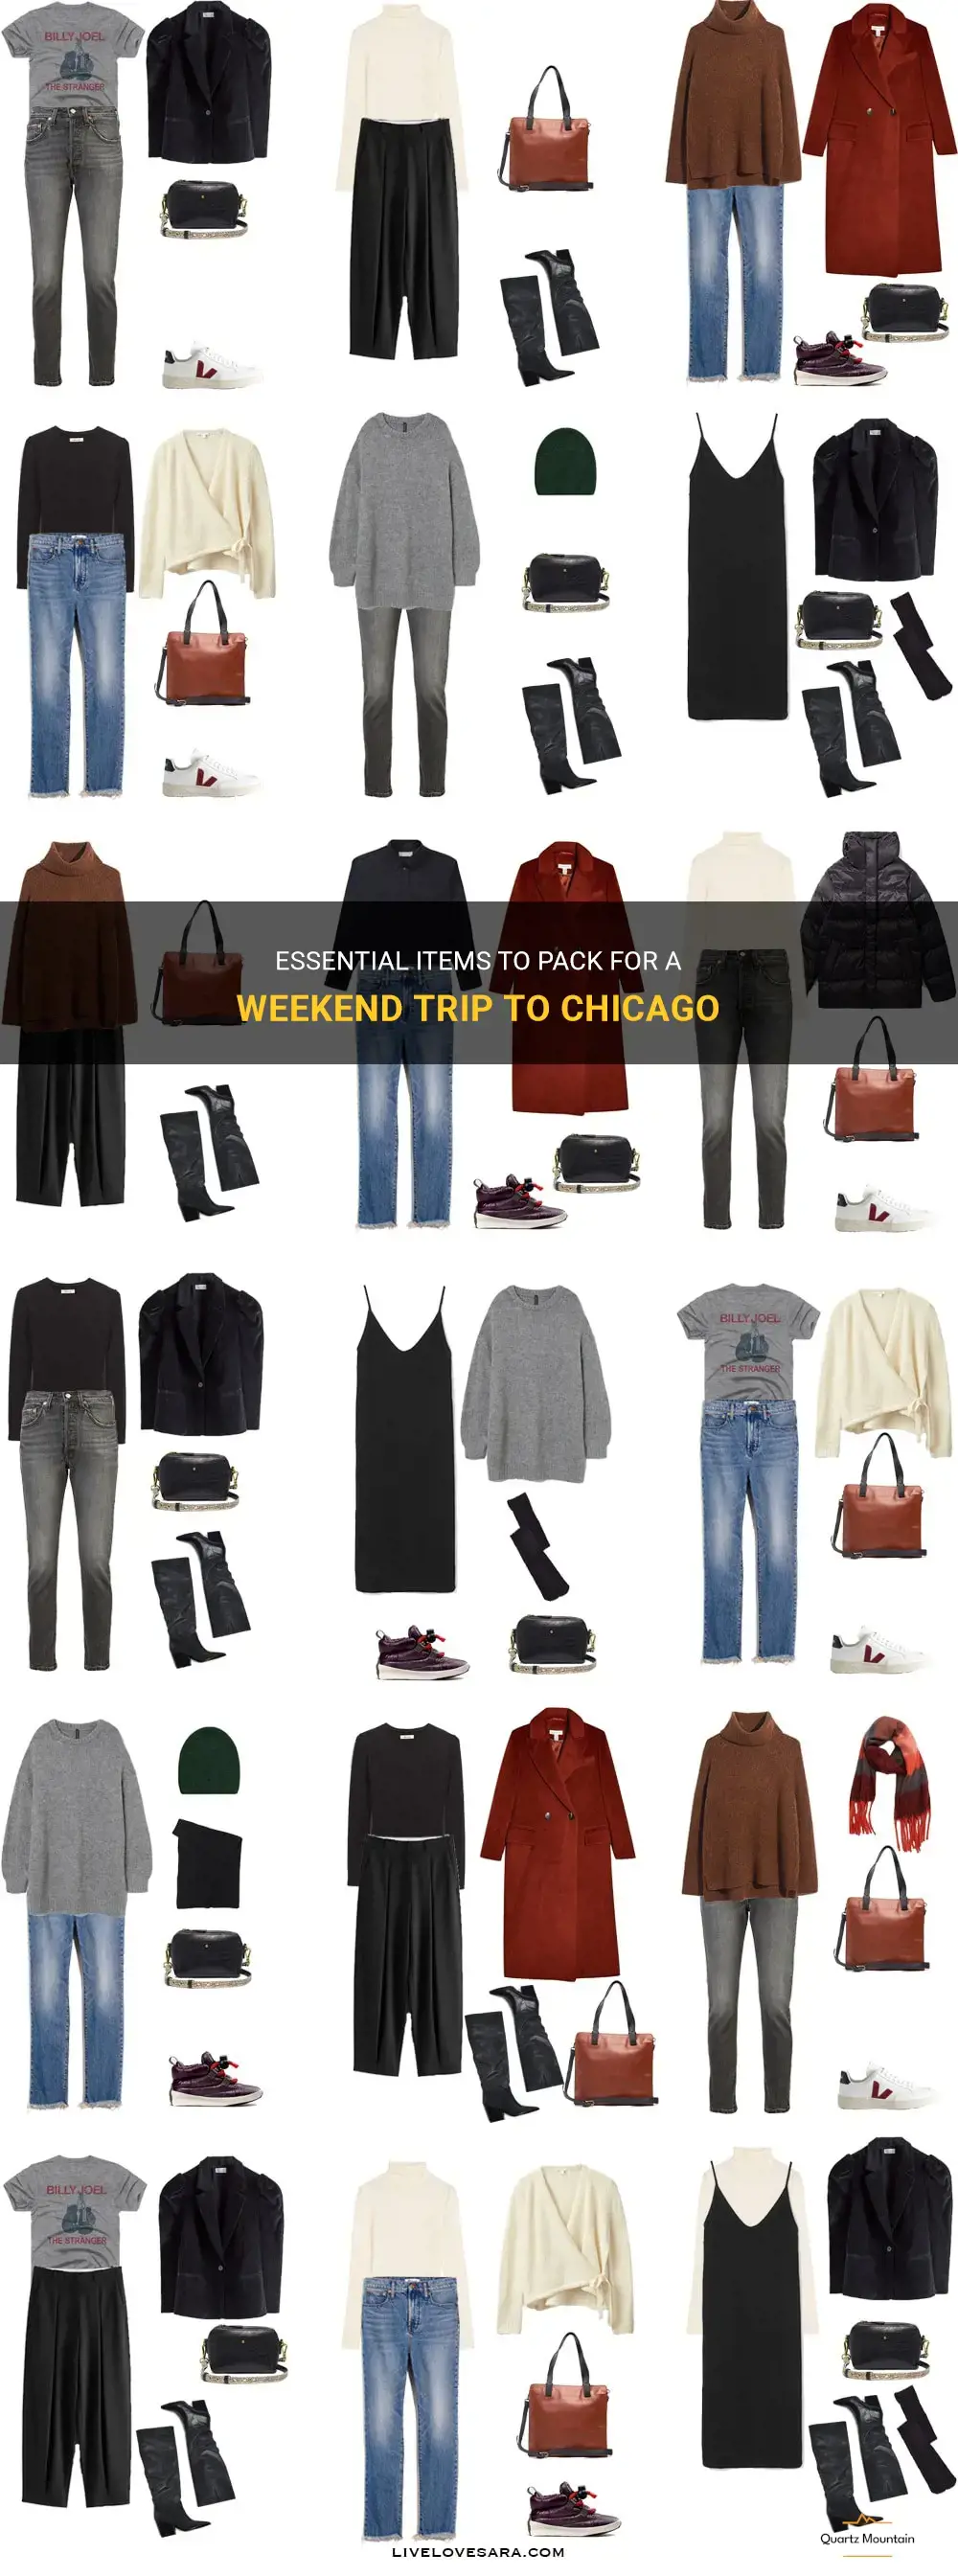 what should I pack for weekend trip to chicago